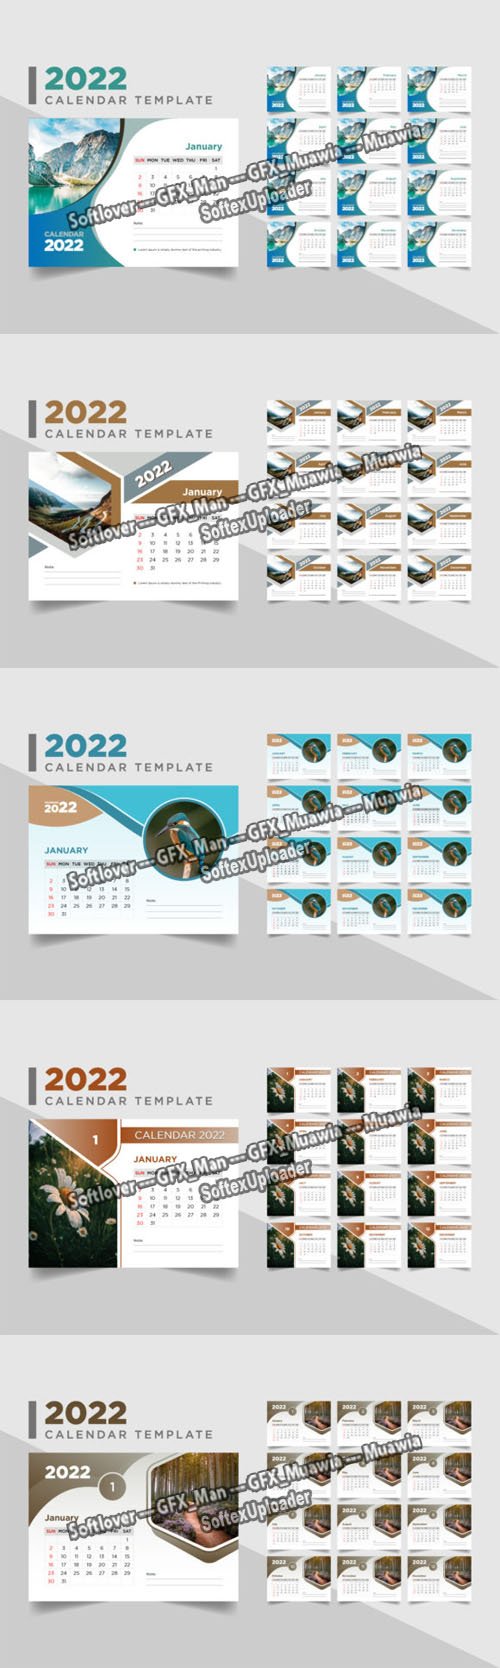 5 Desk Calendars for 2022 Vector Templates Collection [12-Months]